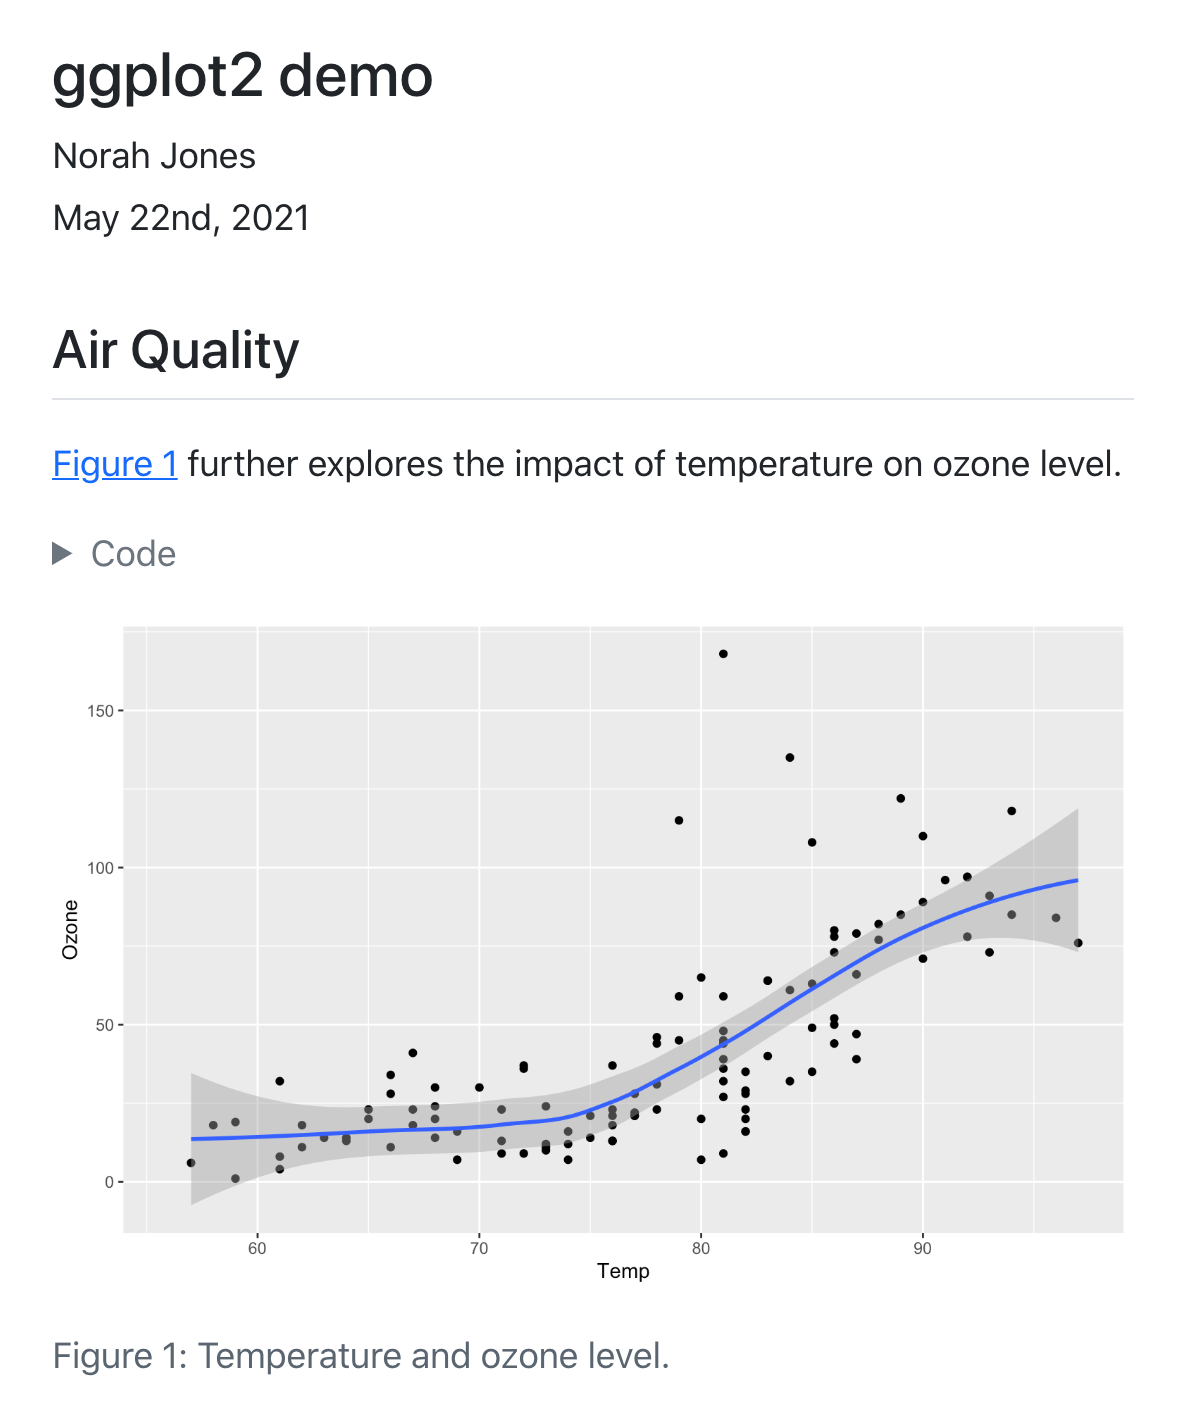 Example output with title (ggplot2 demo), author (Norah Jones), and date (5/22/2021). Below is a header reading Qualité de l'air followed by body text (Figure 1 further explores the impact of temperature on ozone level.) with a toggleable code field, and figure with caption Figure 1 Température et niveau d'ozone.